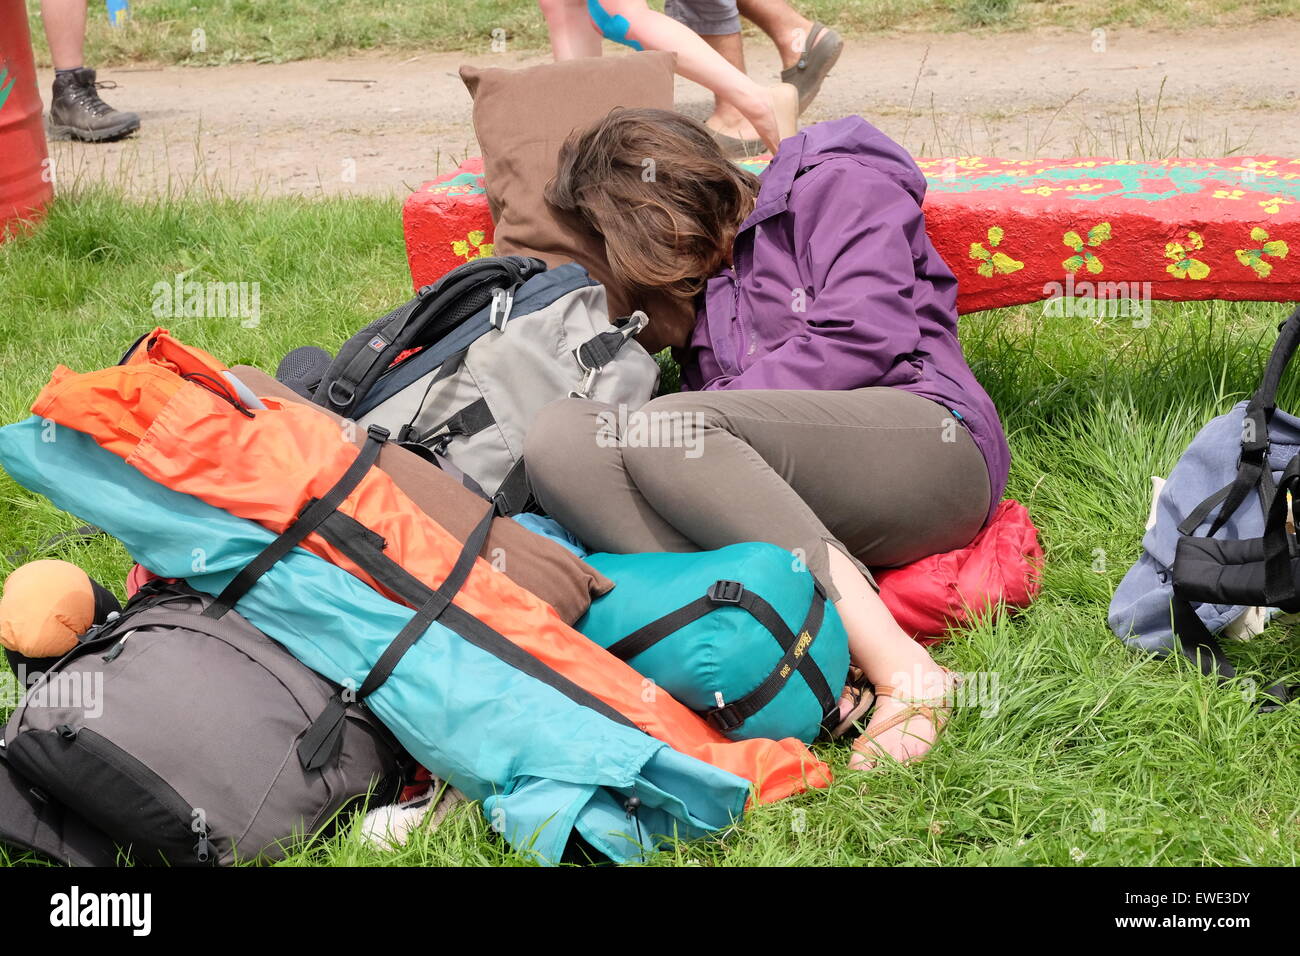 Glastonbury Festival, Somerset, UK. 24 June 2015. As the good weather continues Glastonbury Festival crowds  enjoy the sunshine as they settle into the site some take the time to chill out others catch up on lost sleep. Credit:  Tom Corban/Alamy Live News Stock Photo